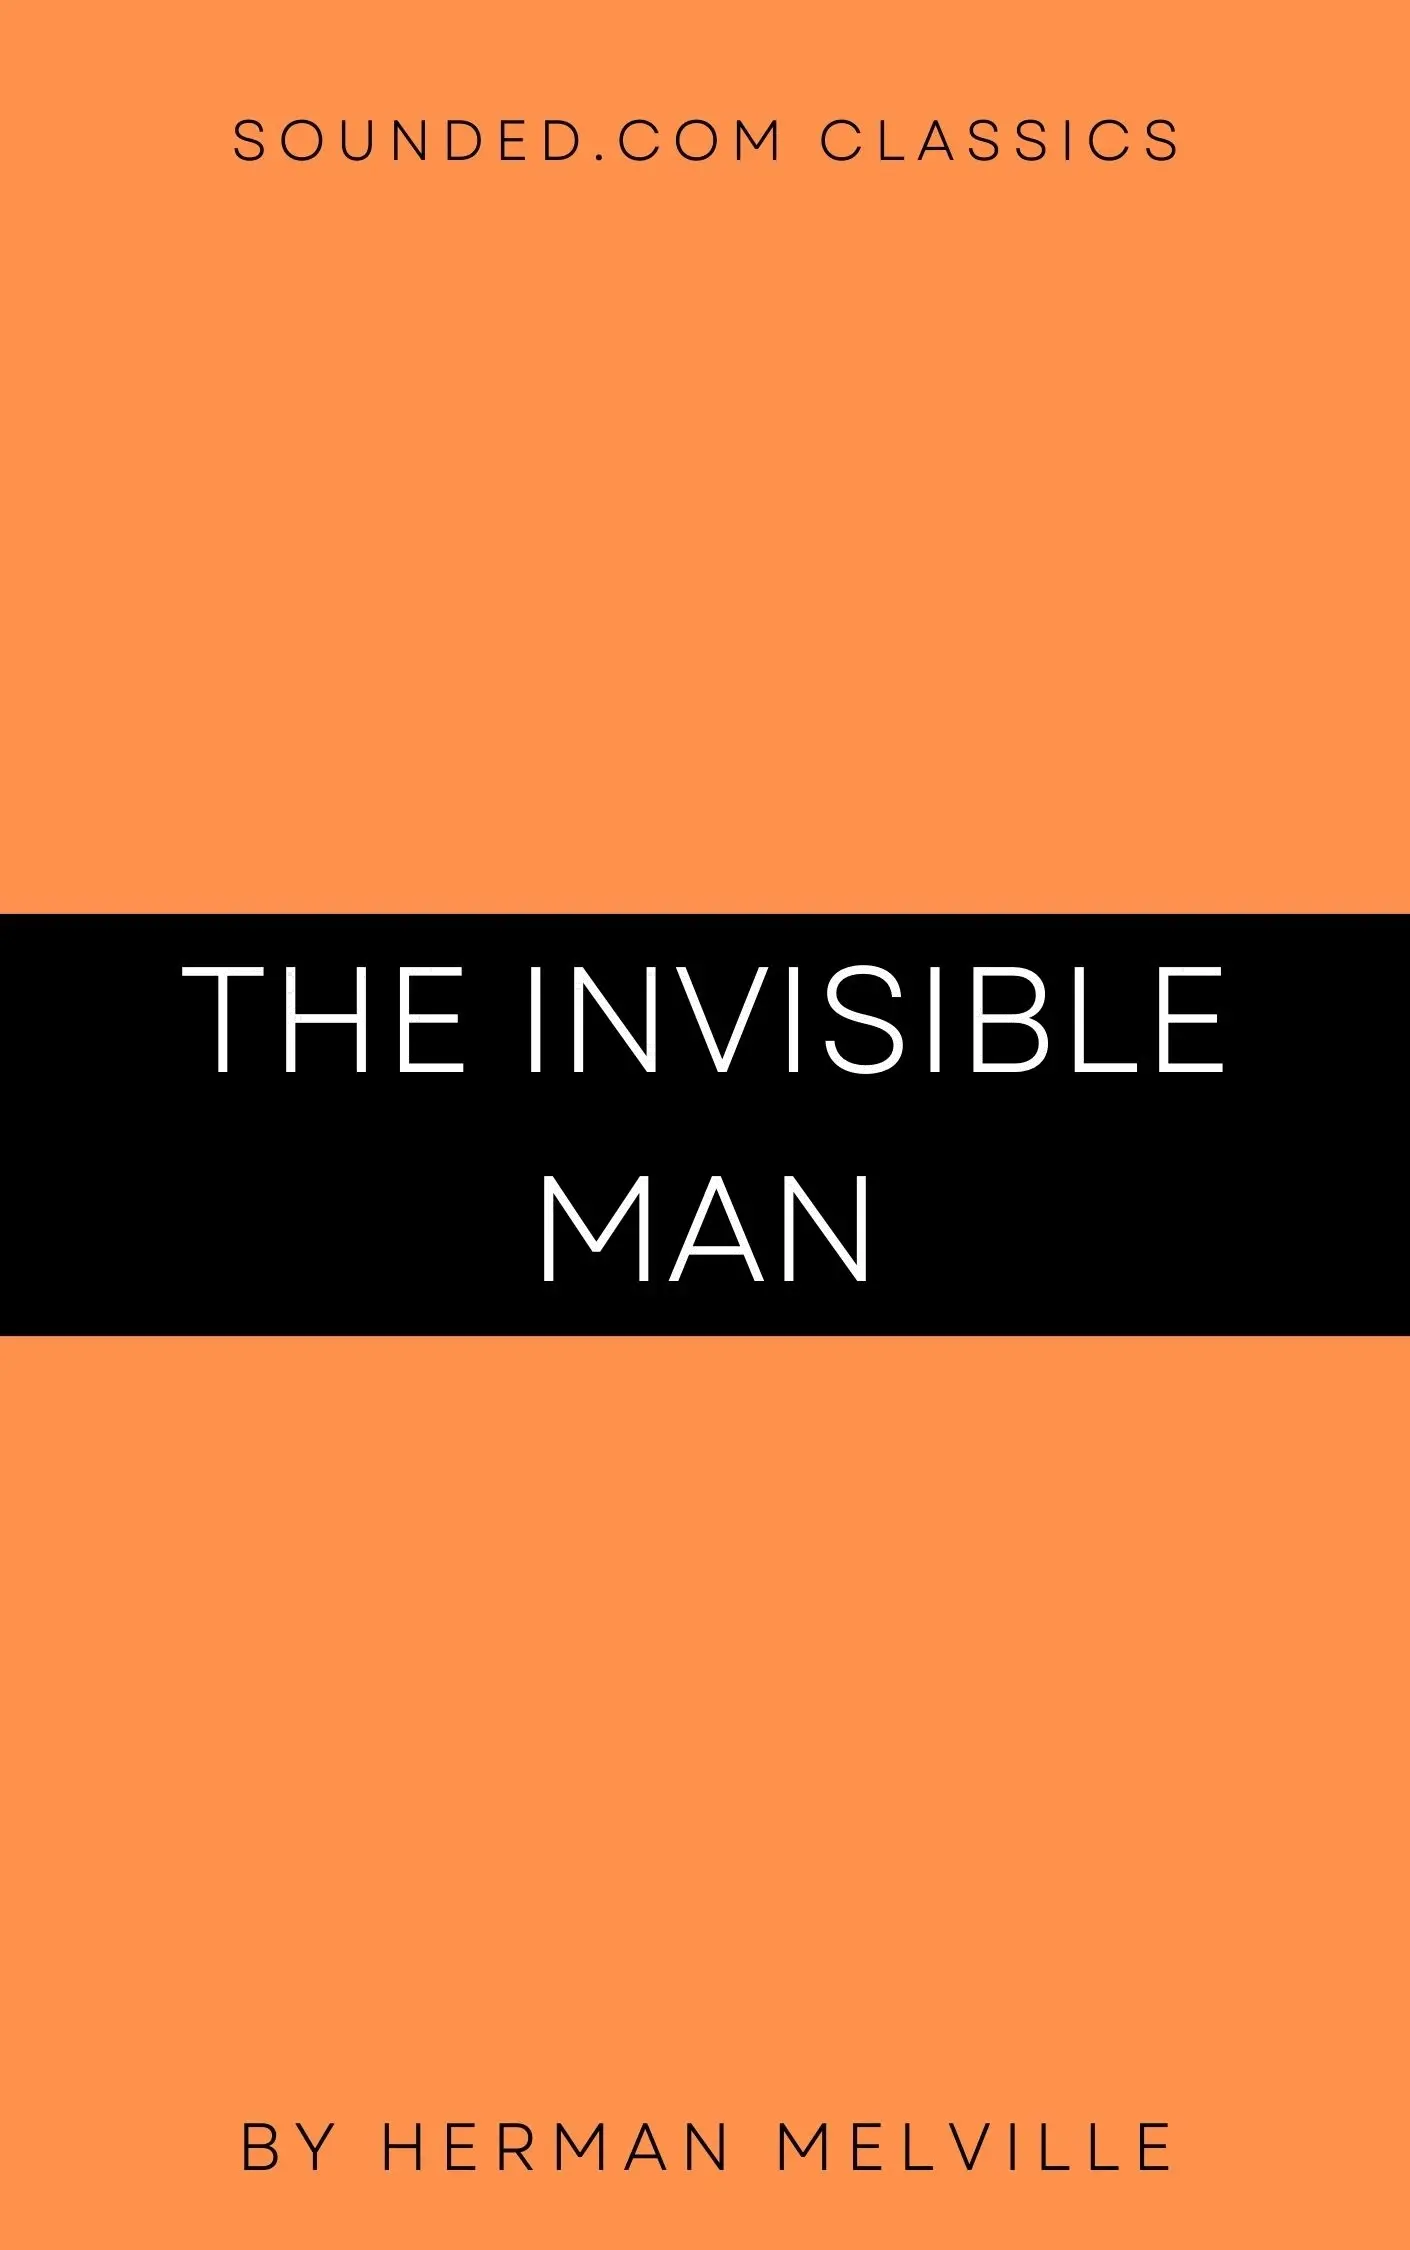 The Invisible Man by H. G. Wells Audiobook